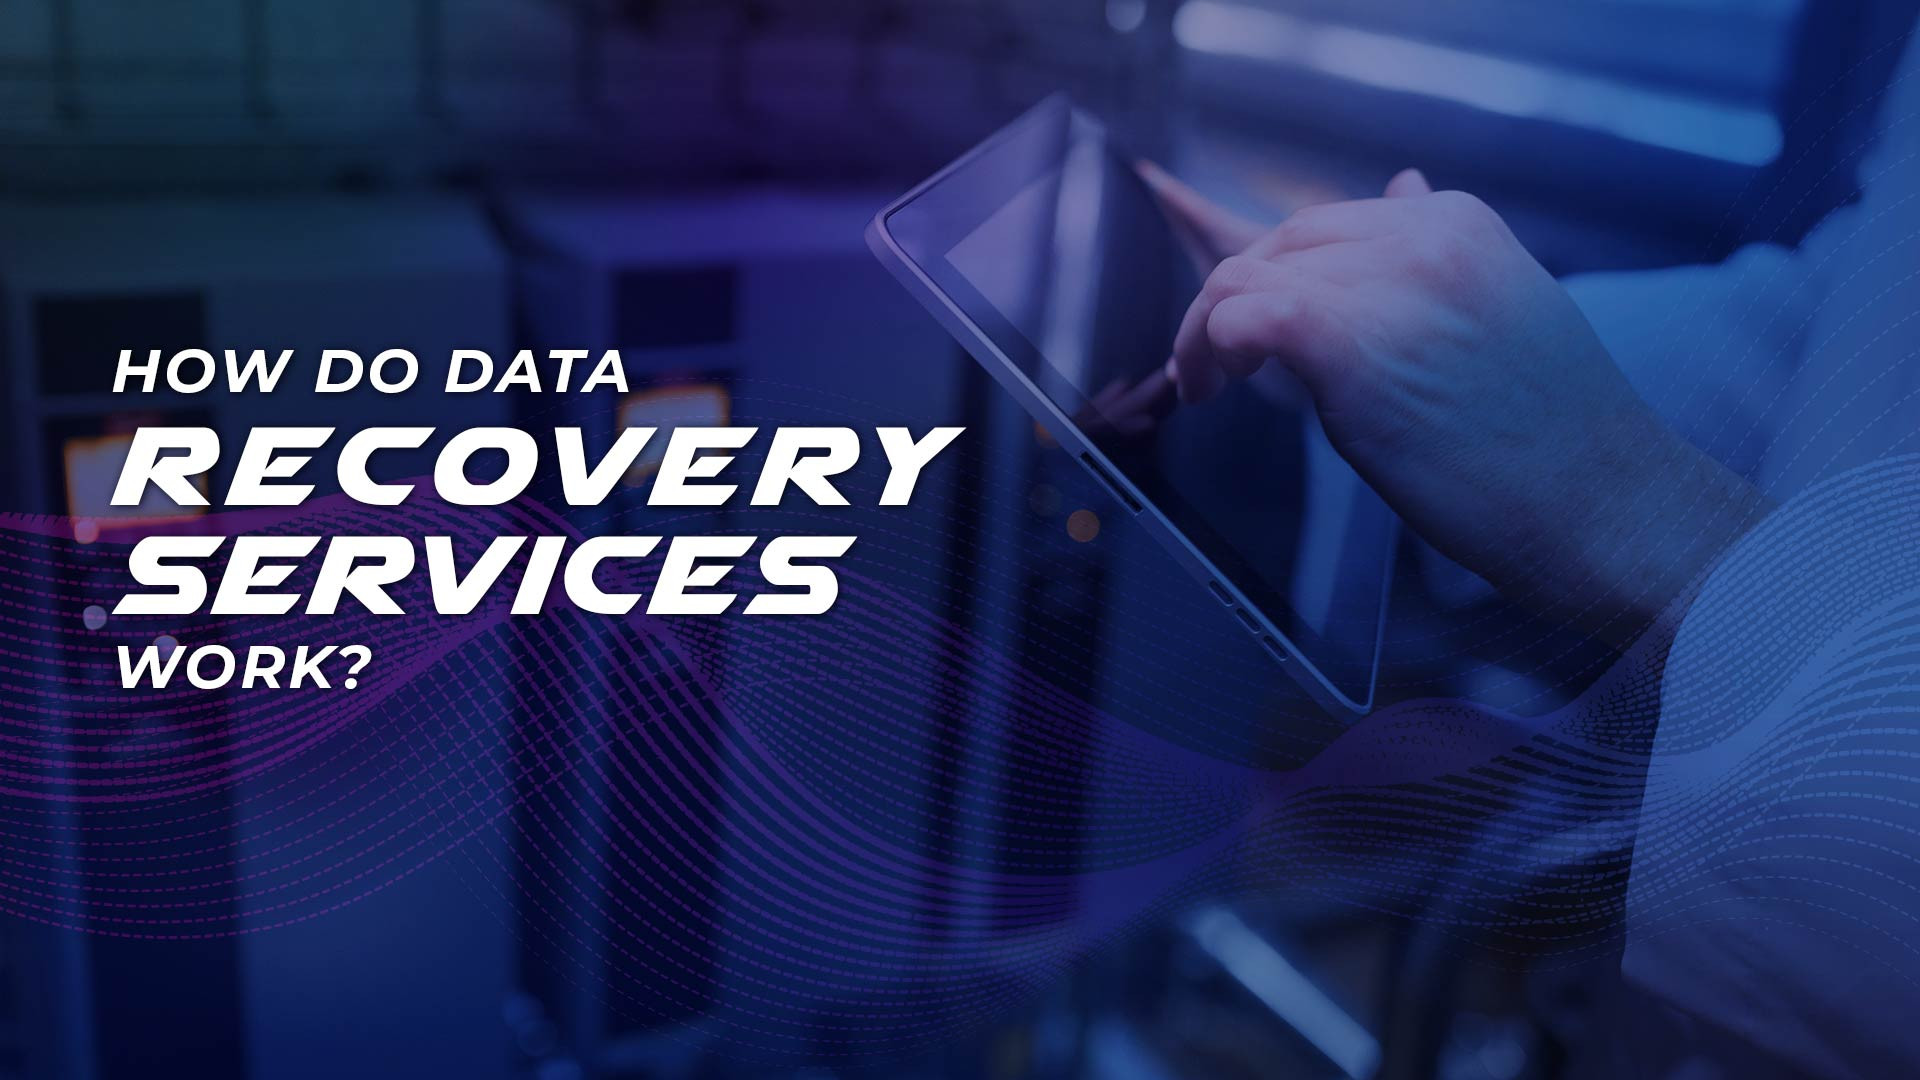 How do data recovery services work